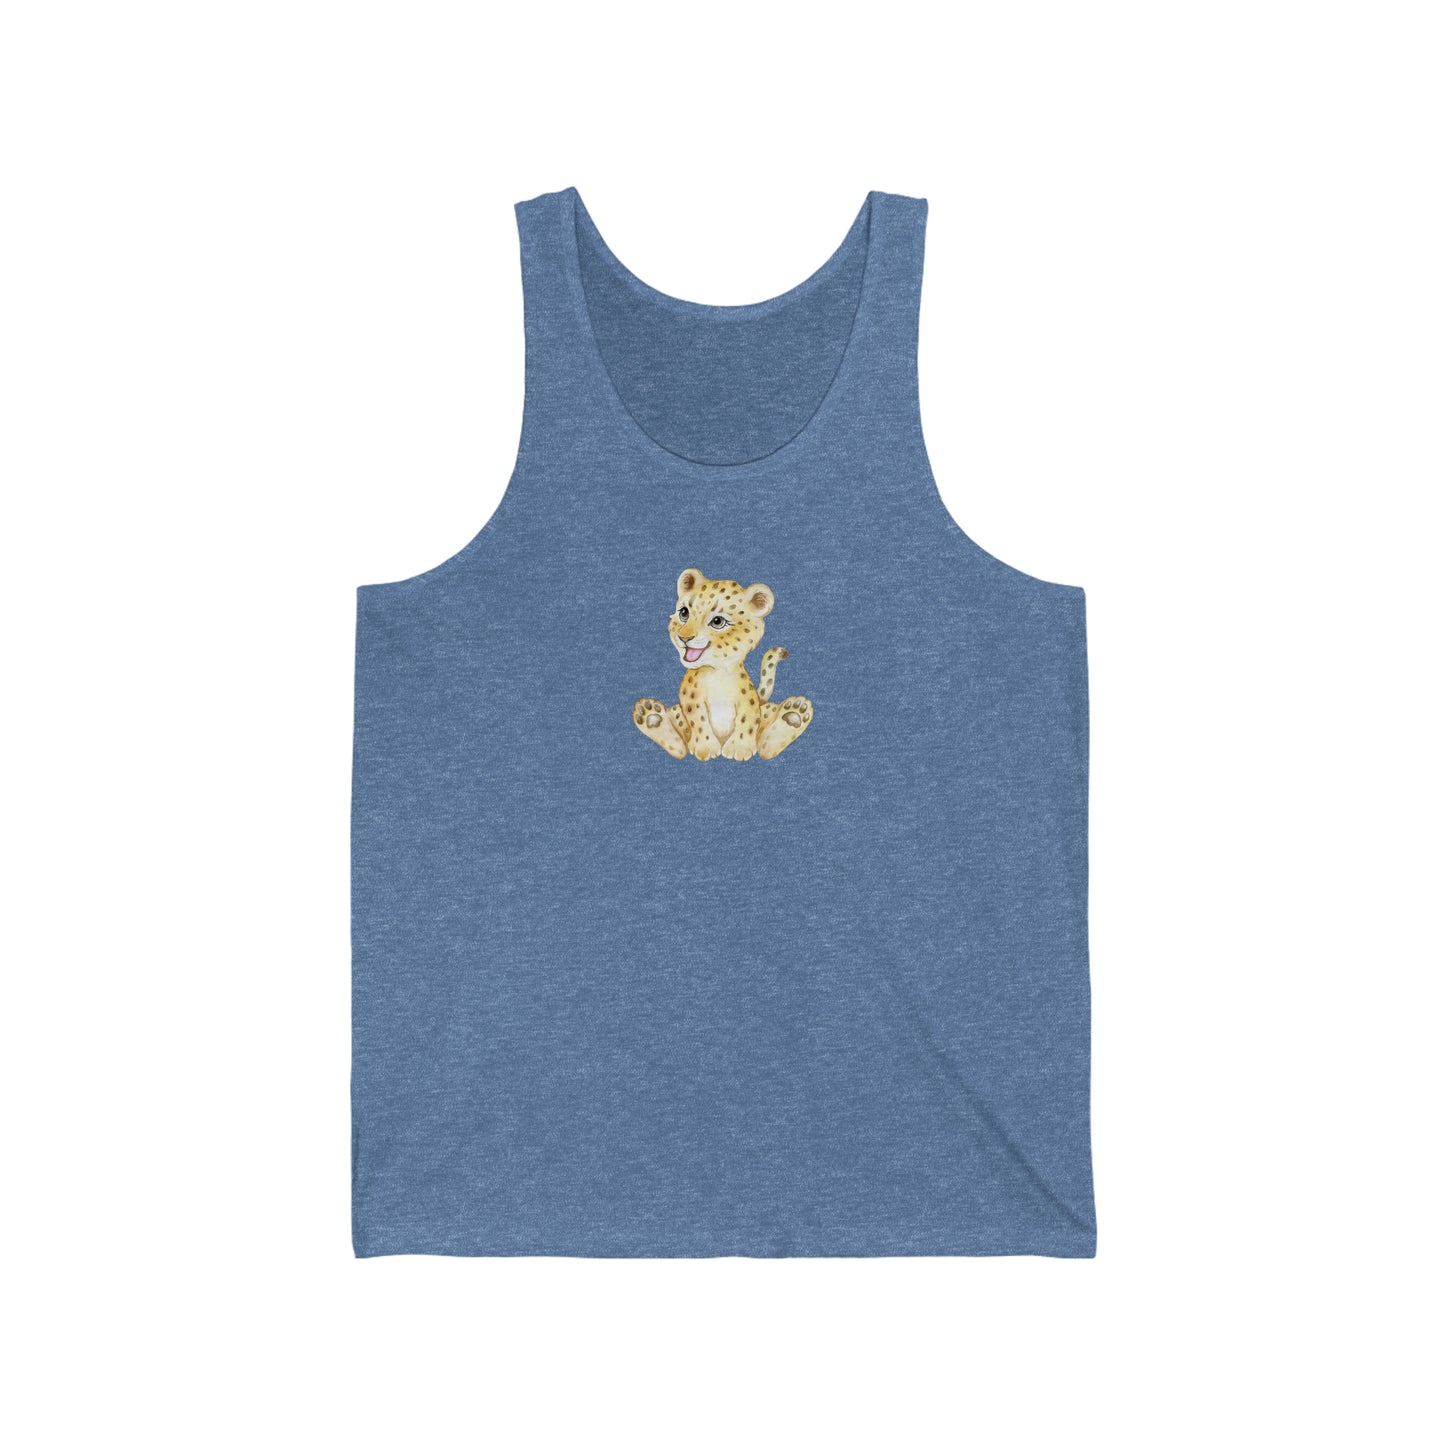 ‘Baby lion’ Printed Front & Back.  Unisex Jersey Tank